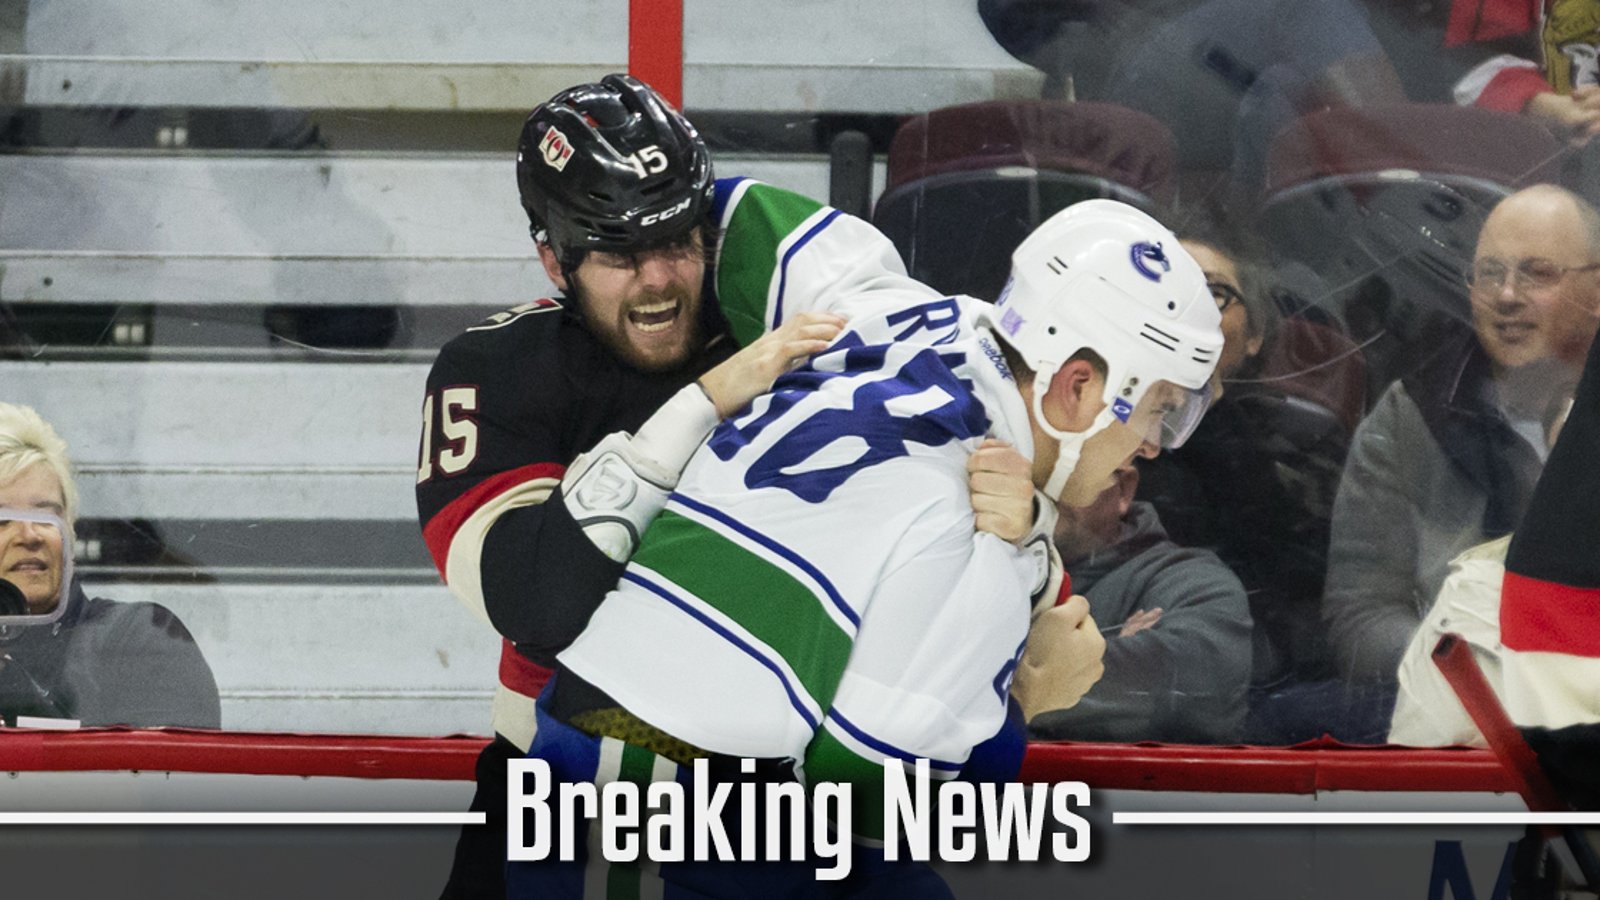 BREAKING: GM makes public announcement after losing two defensemen to the KHL.